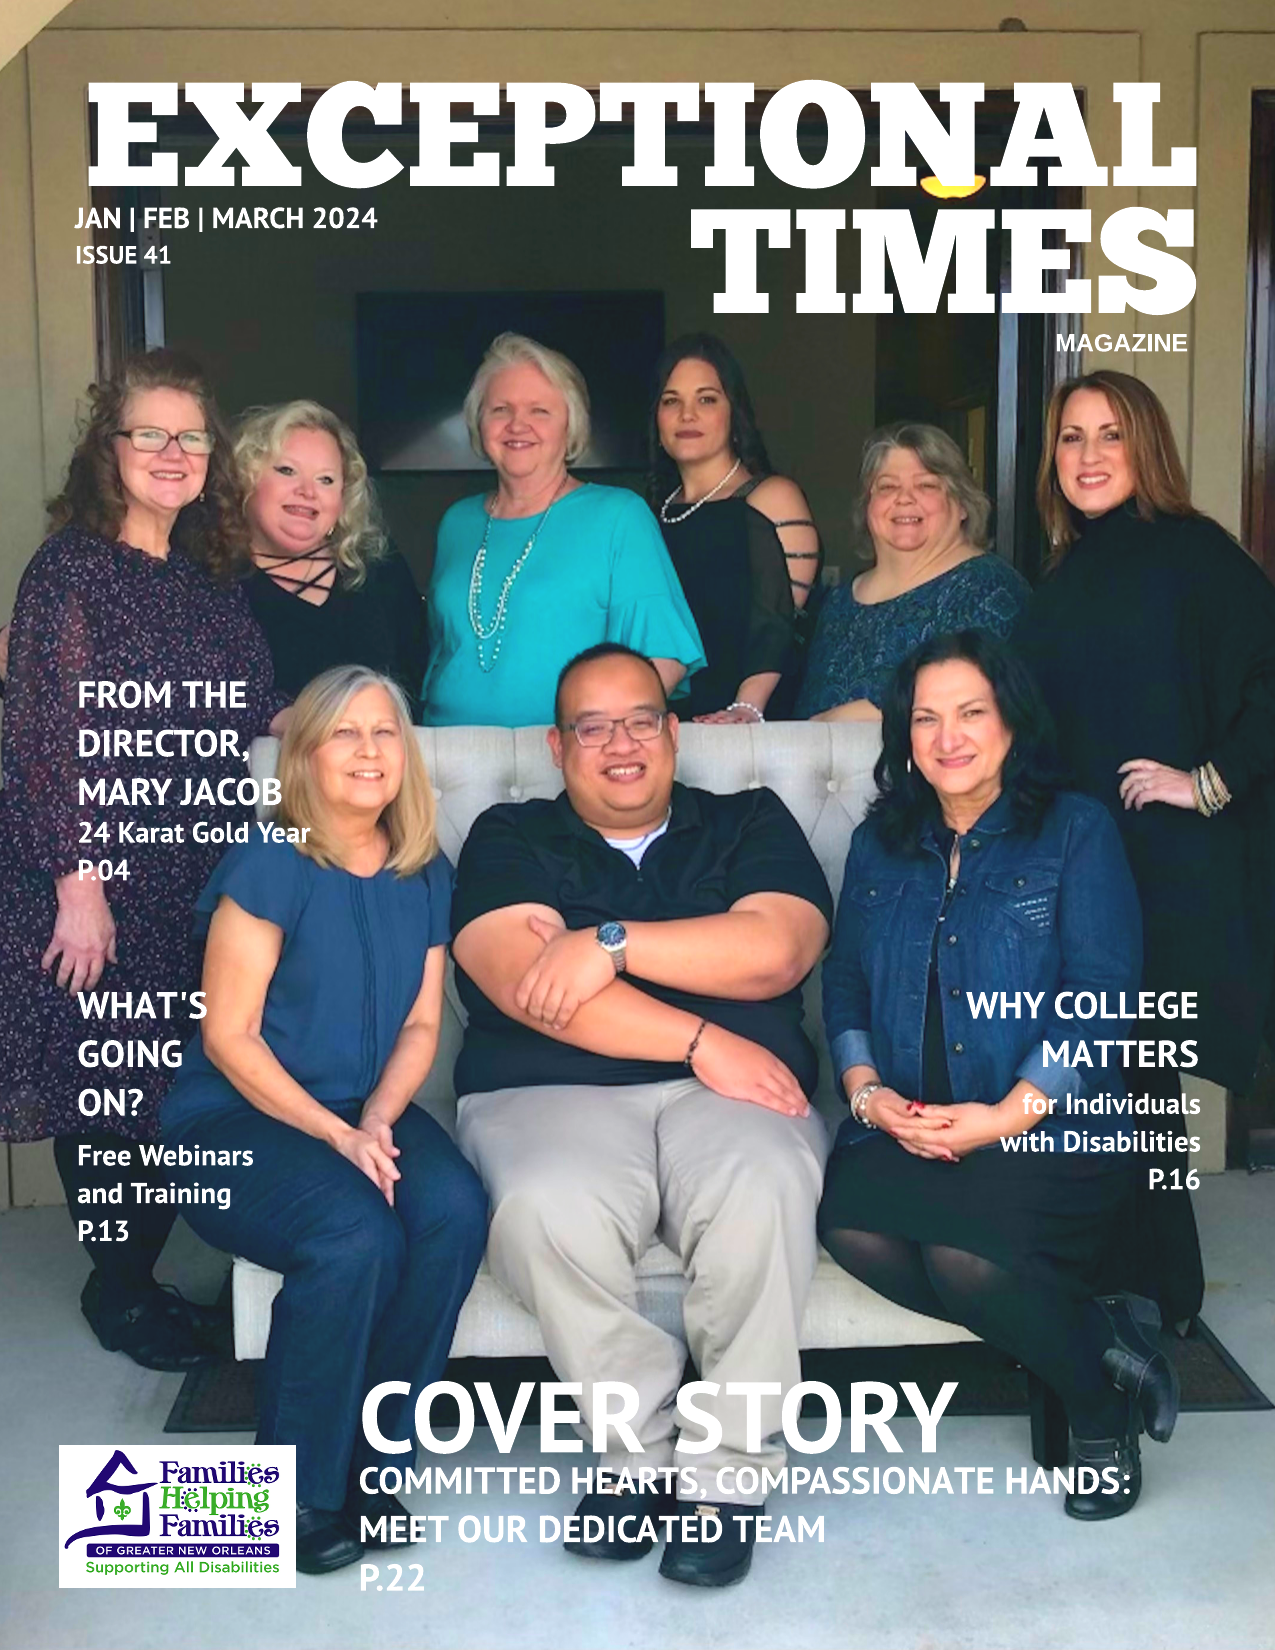 1st Quarter 2024 Exceptional Times Digital Magazine - Cove phot is of the staff at FHF of GNO